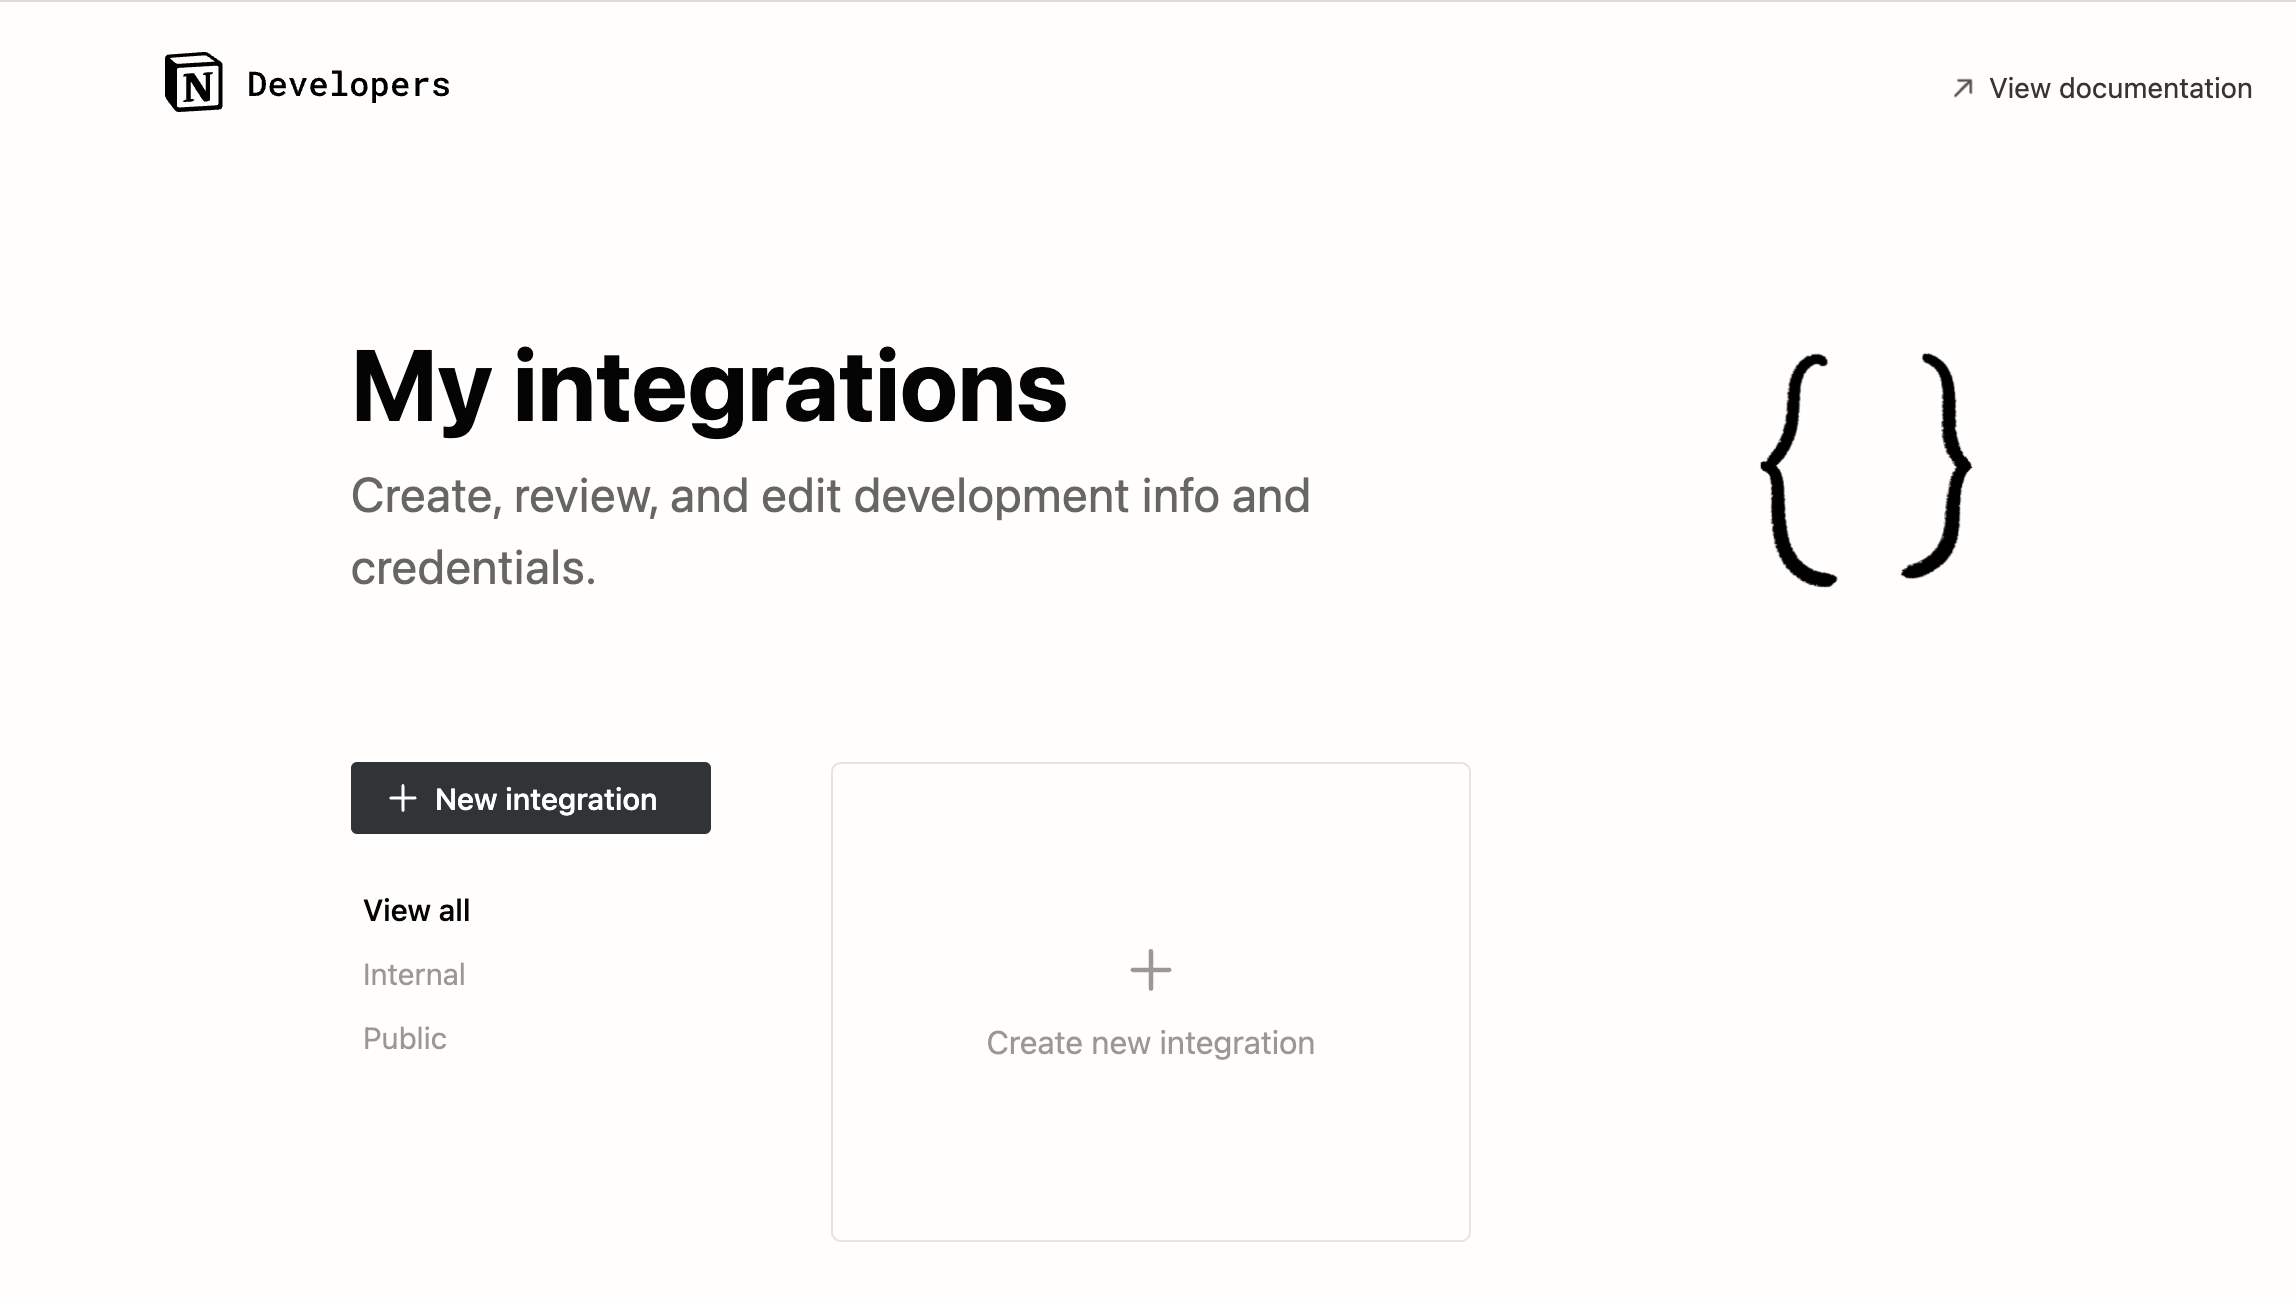 Click the **New integration** button on the My integrations page to create a new integration.